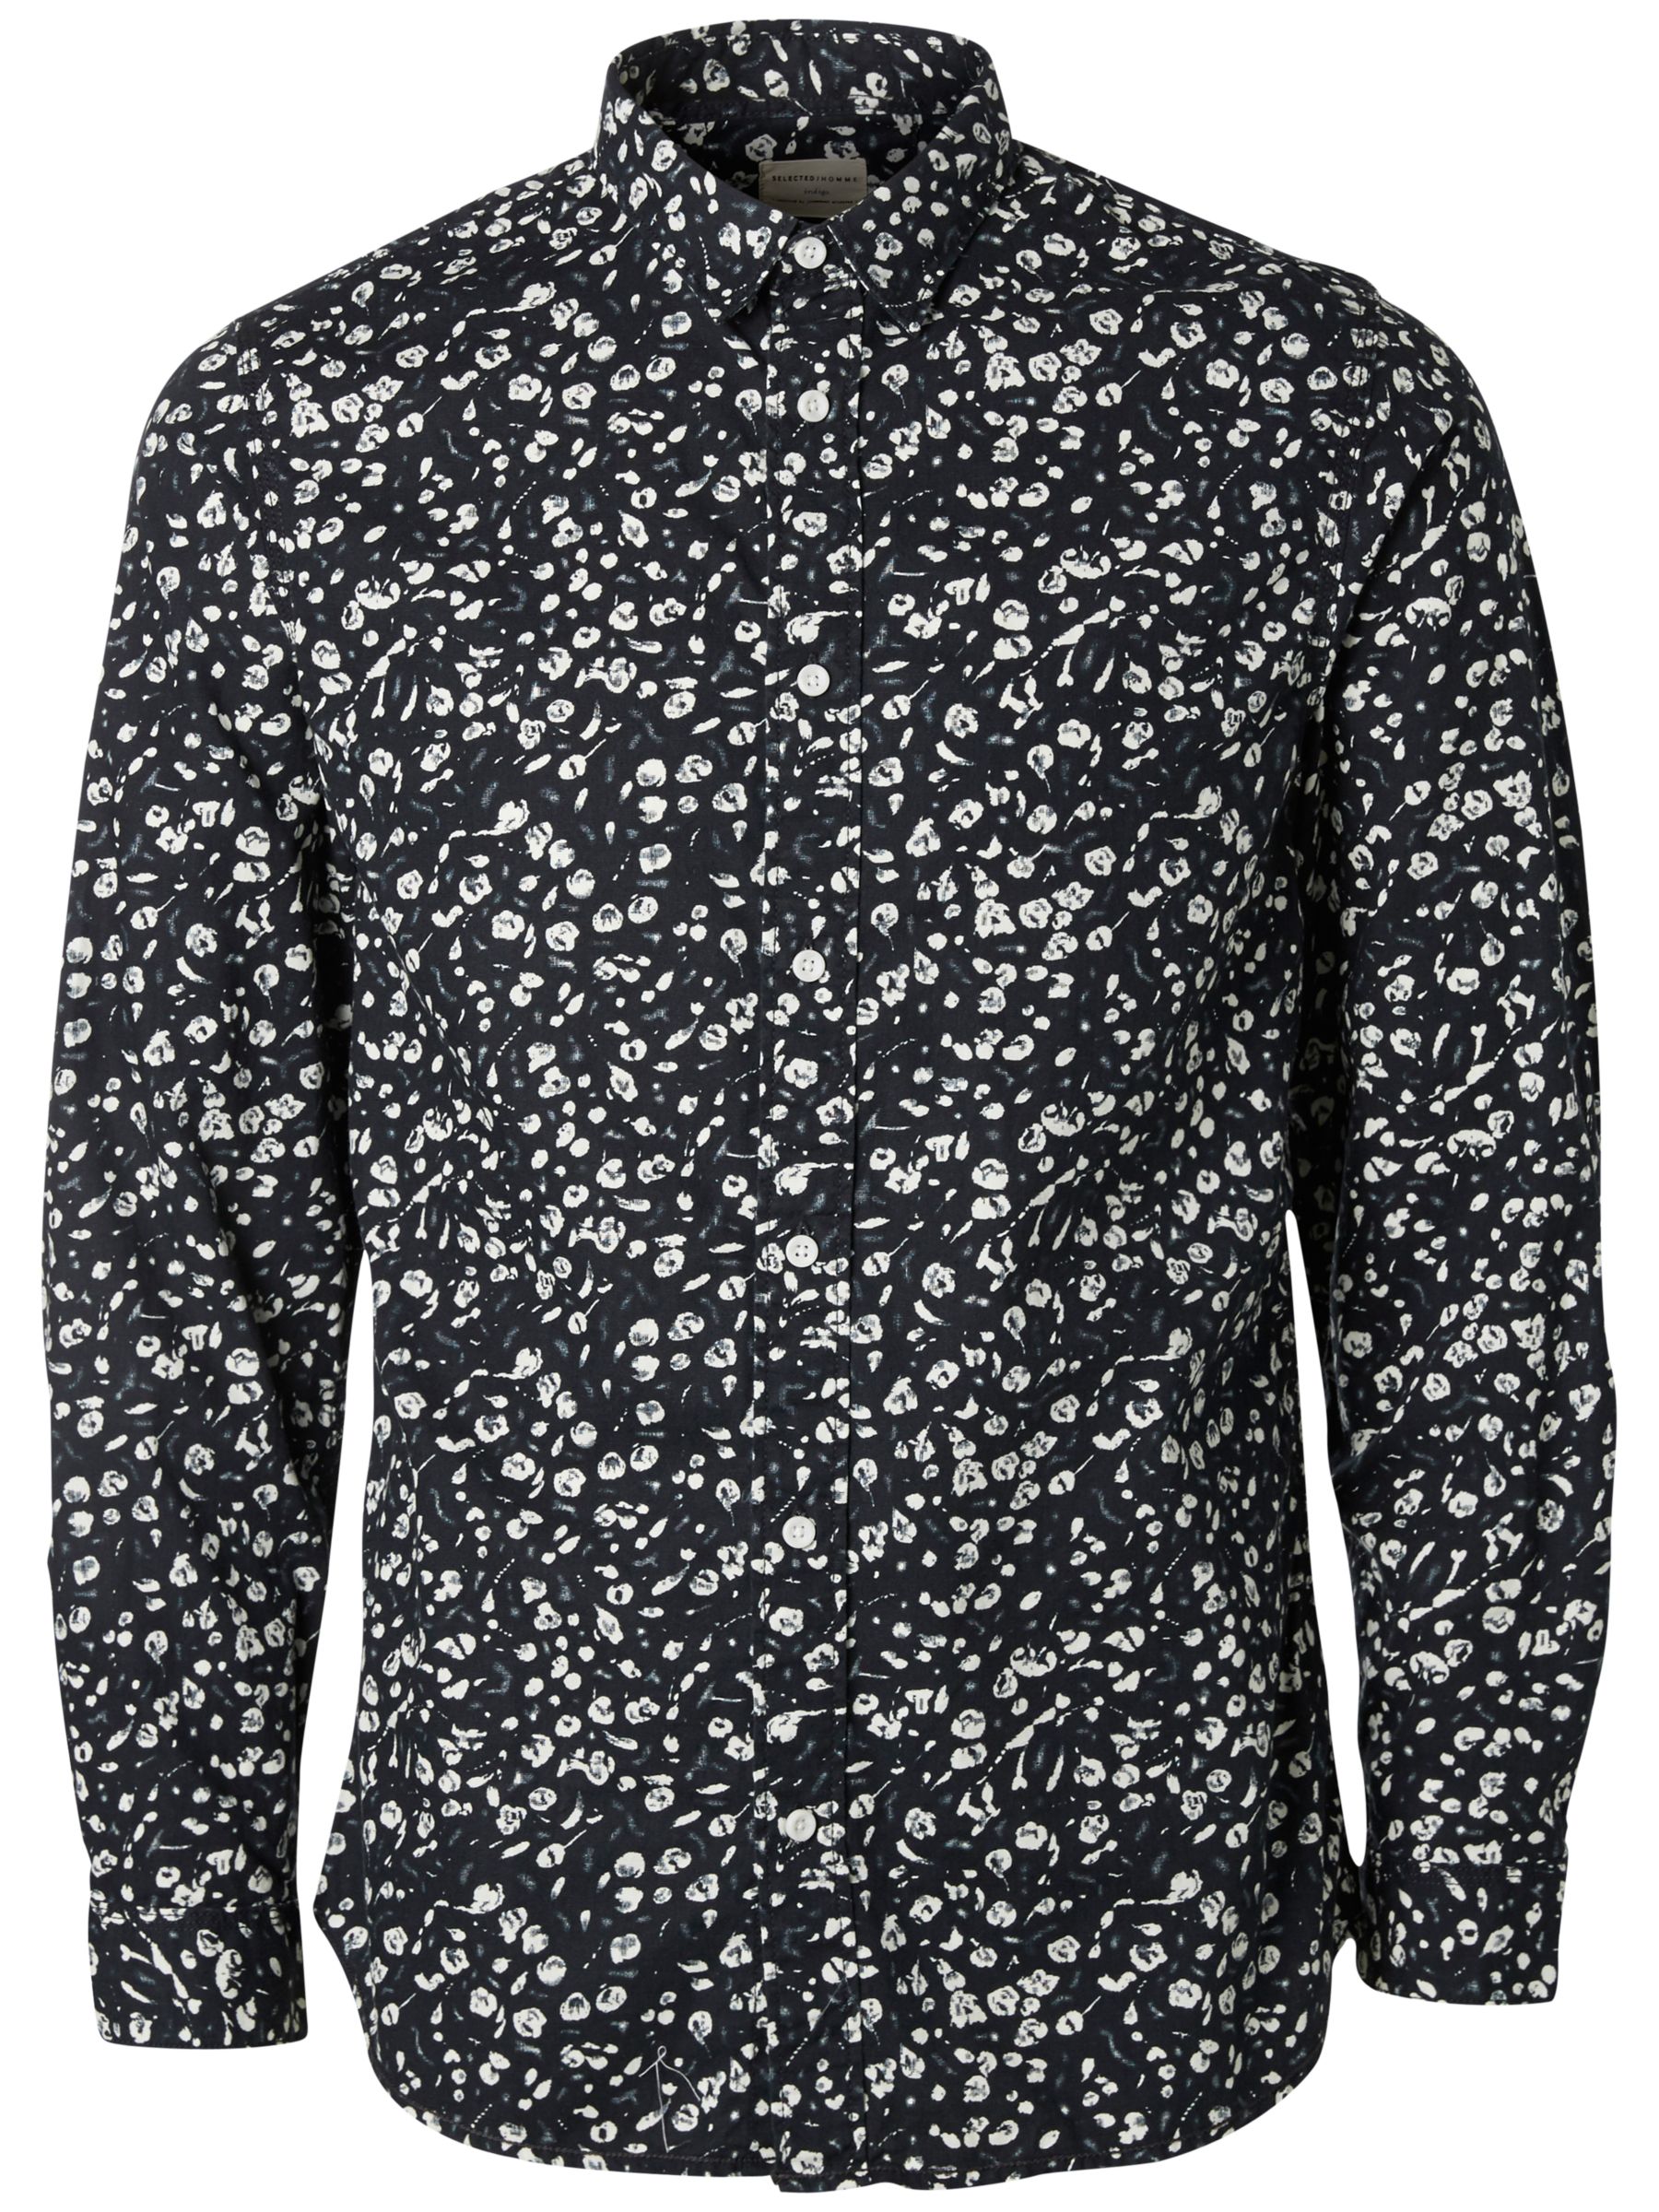 Selected Homme One Curtis Print Shirt, Blue Fox at John Lewis